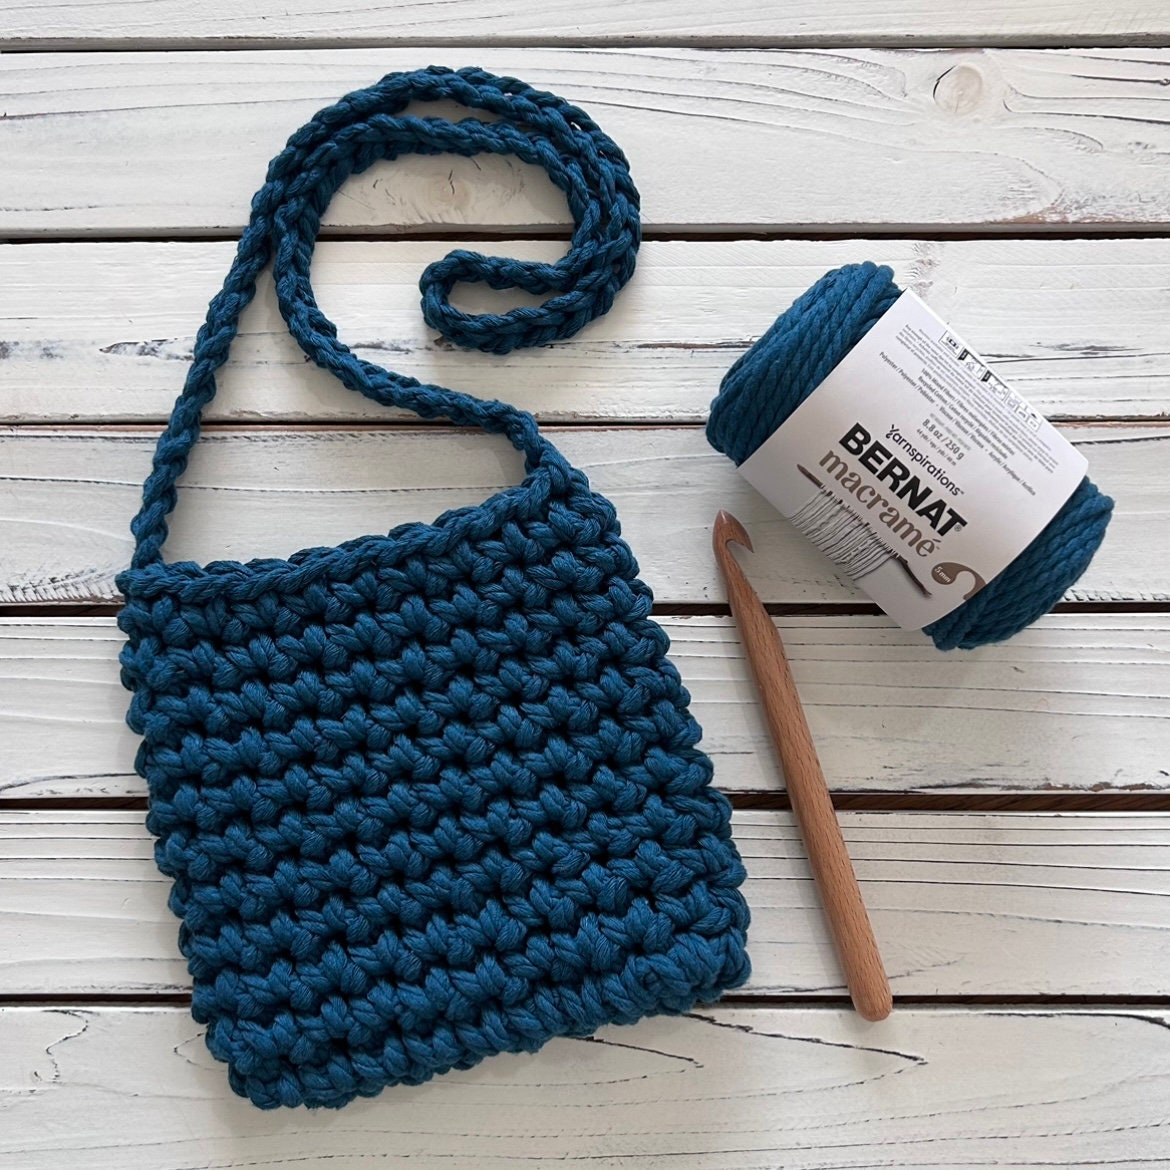 Add a lining and an adjustable strap to the Yarnspirations Granny Fanny